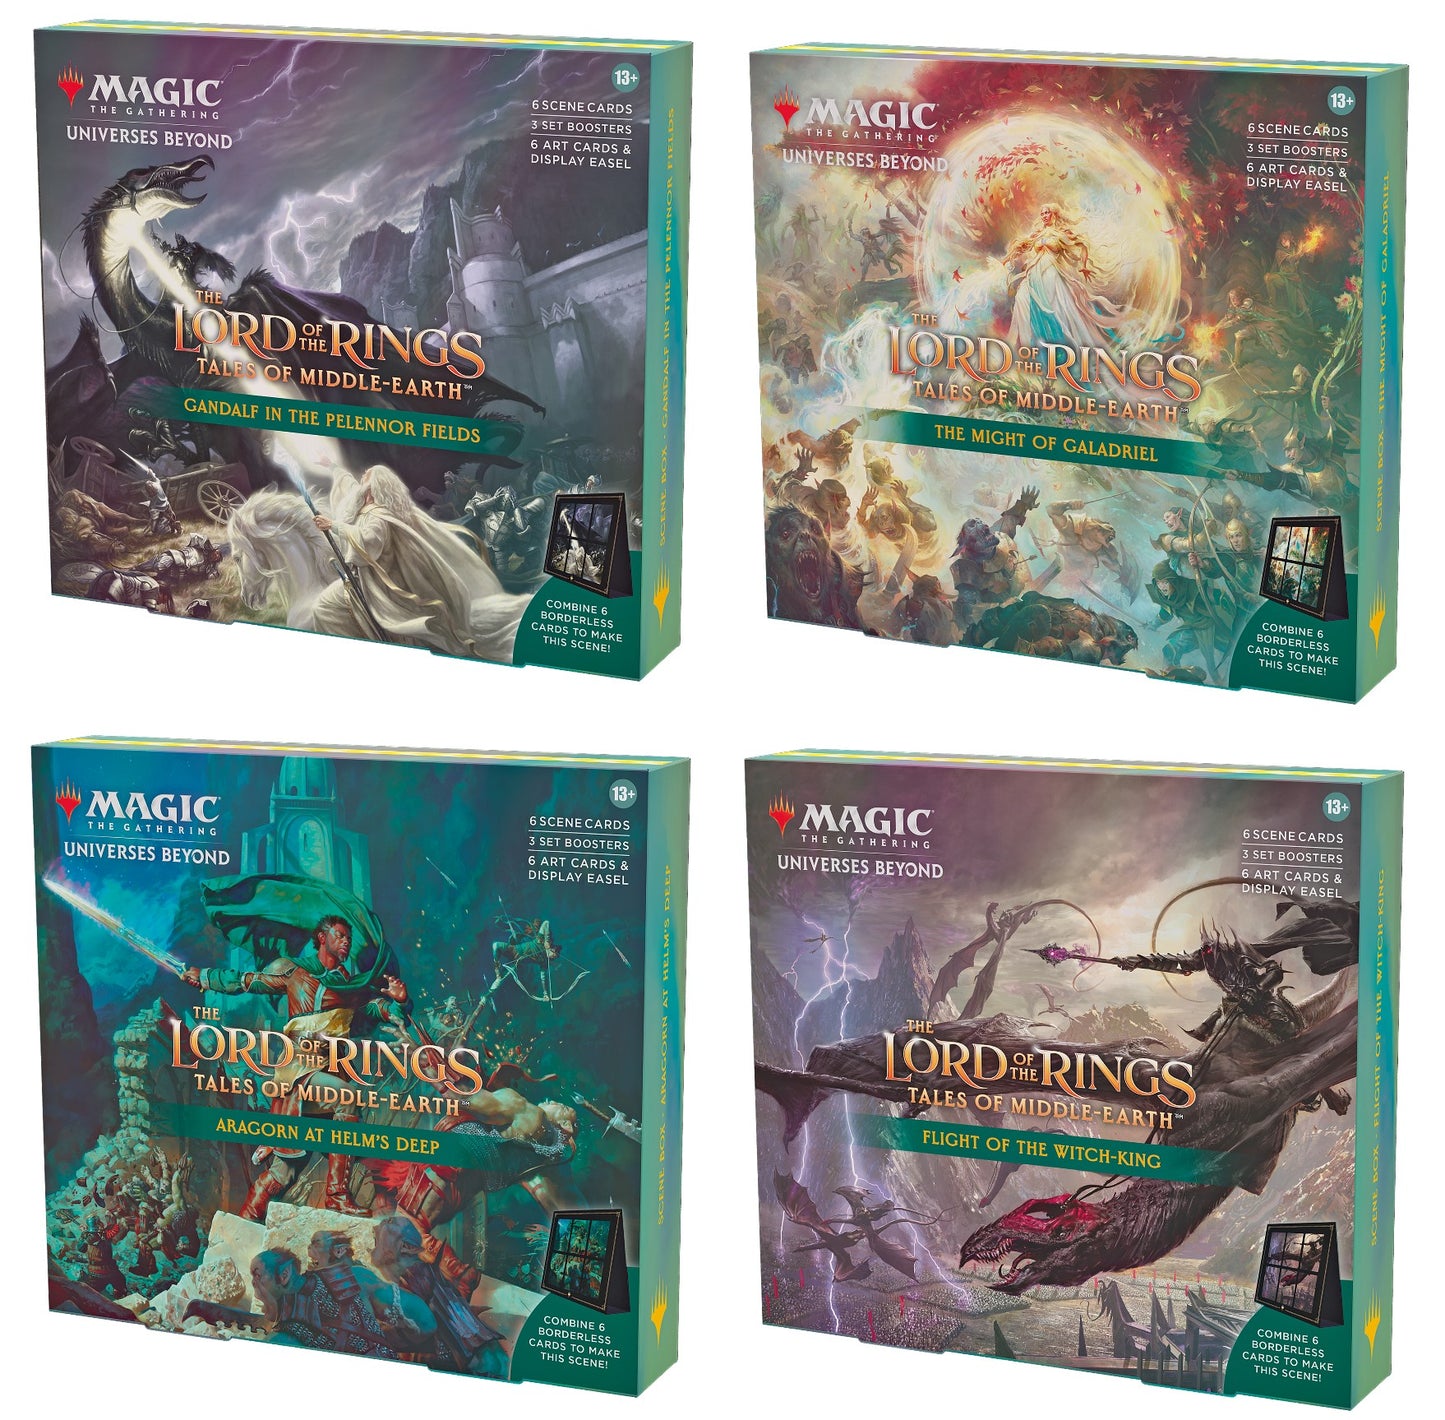 Magic: The Gathering - Lord of the Rings: Tales of Middle-earth Scene Box (4ct carton) - Preorder - Release 11/02/2023